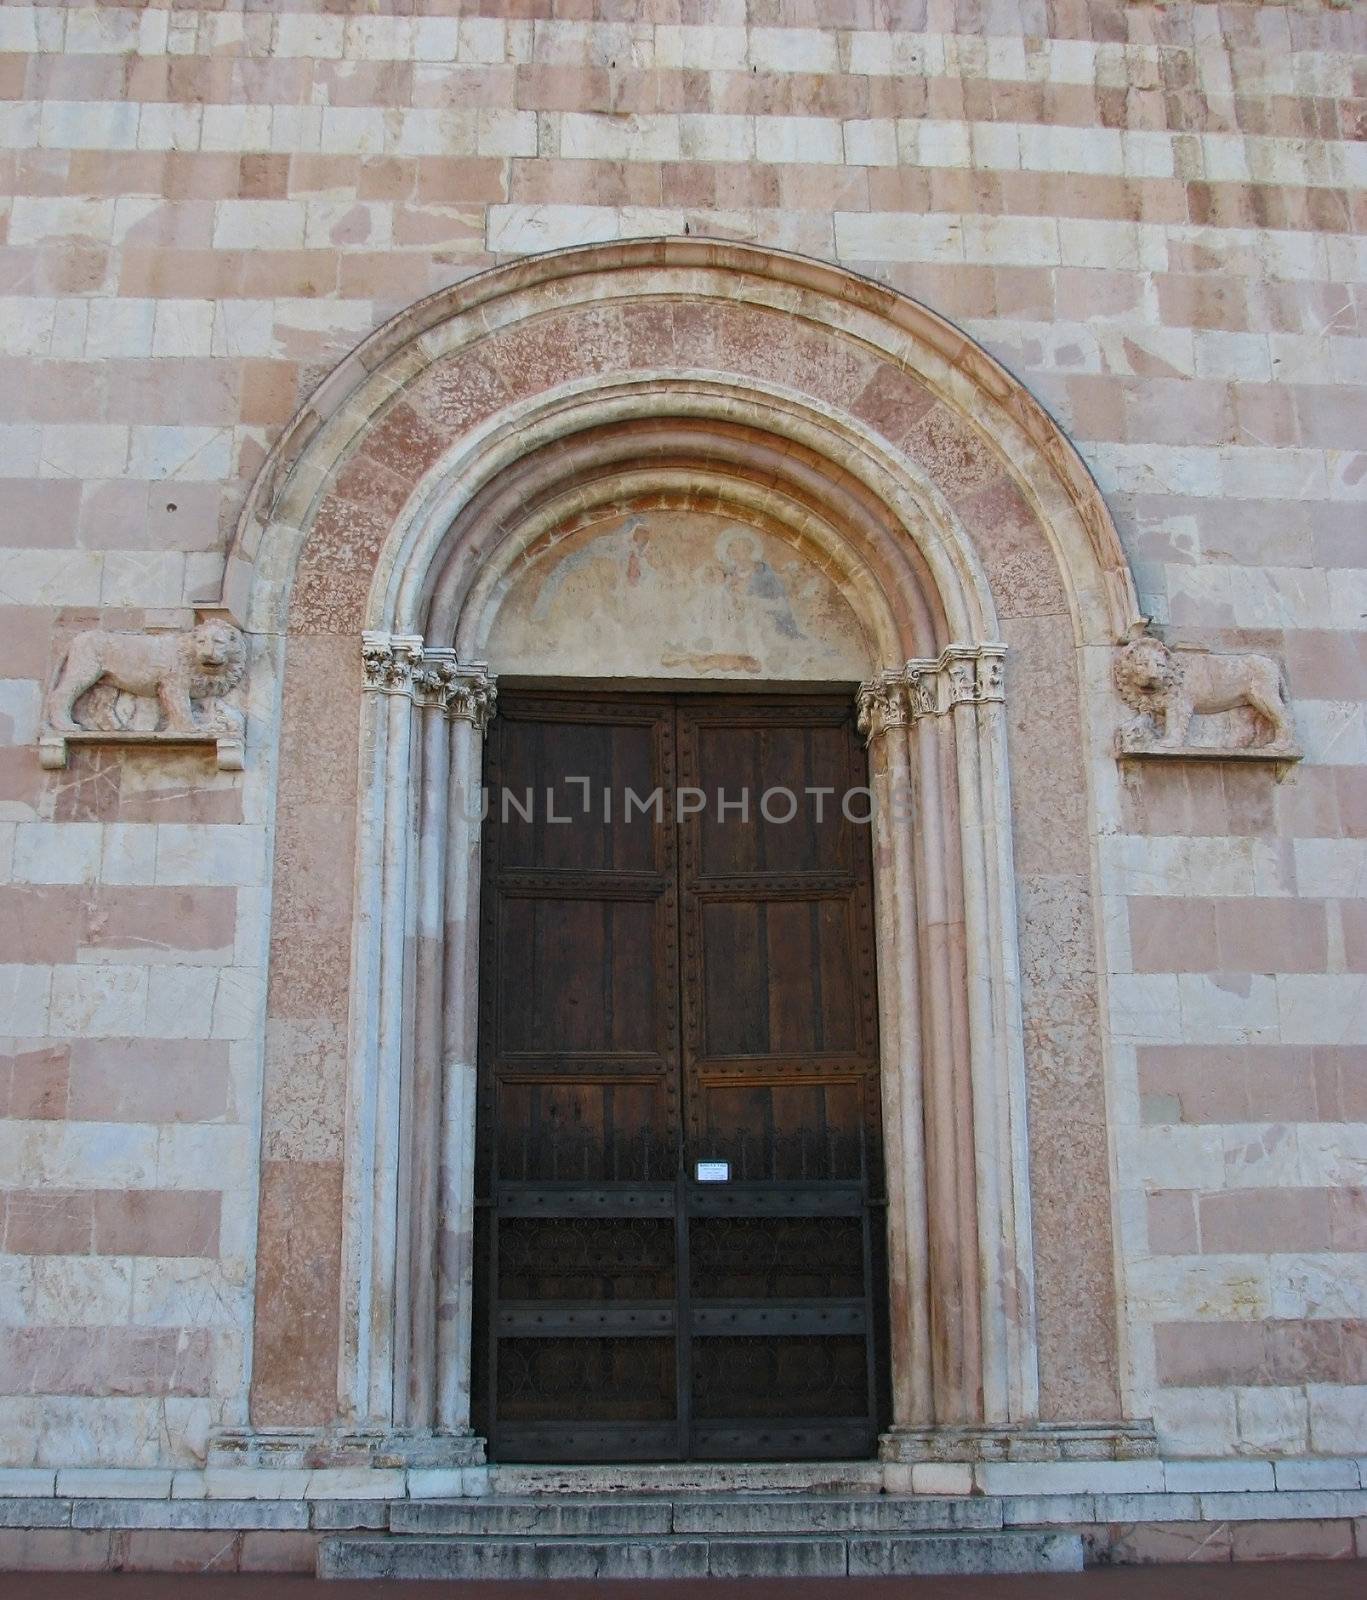 The ancient doors of St. Clare Basilica in Assisi, Italy
